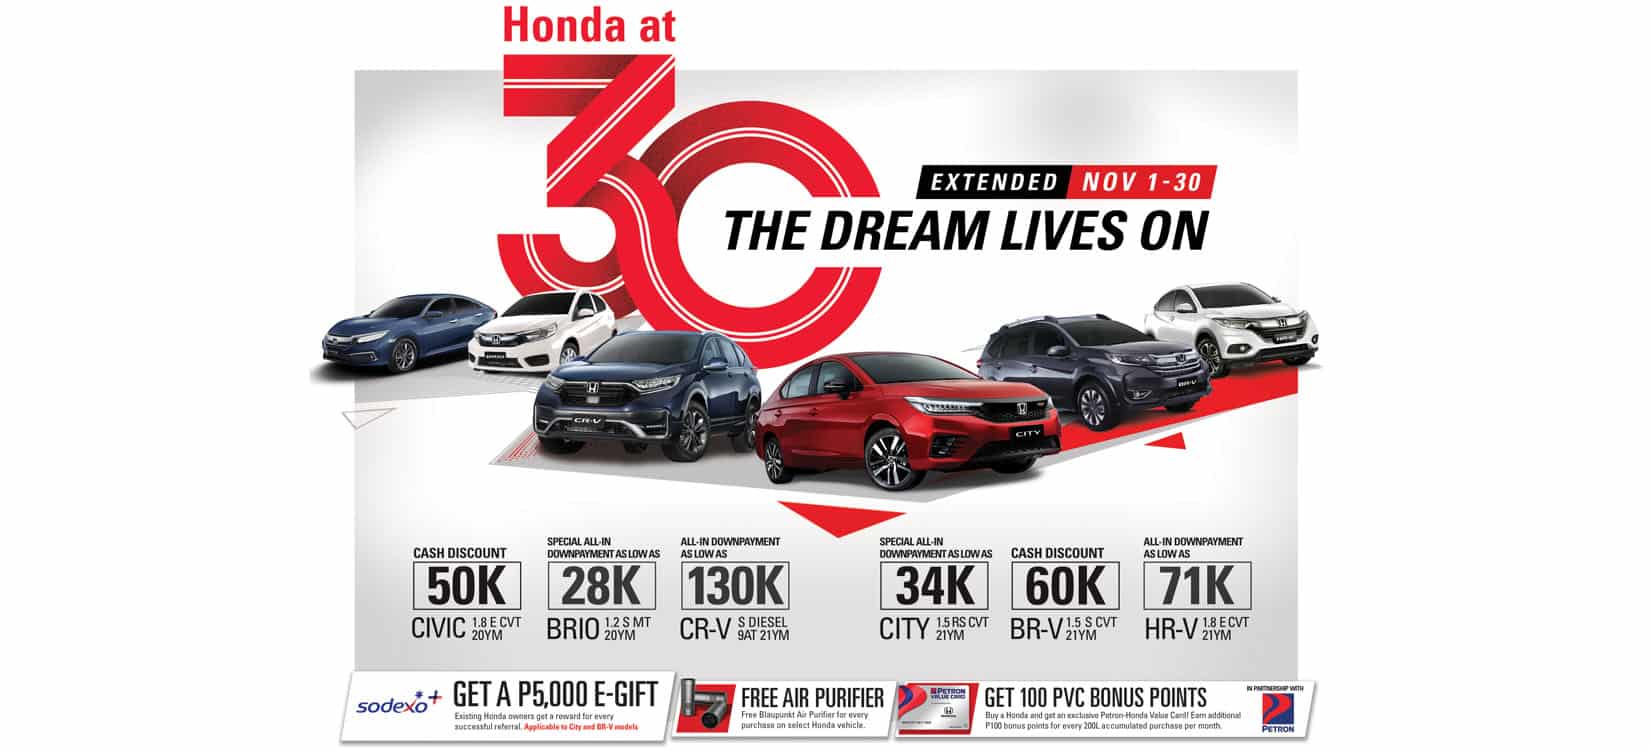 Honda continues its 30th anniversary celebration with exciting deals and special offerings this November